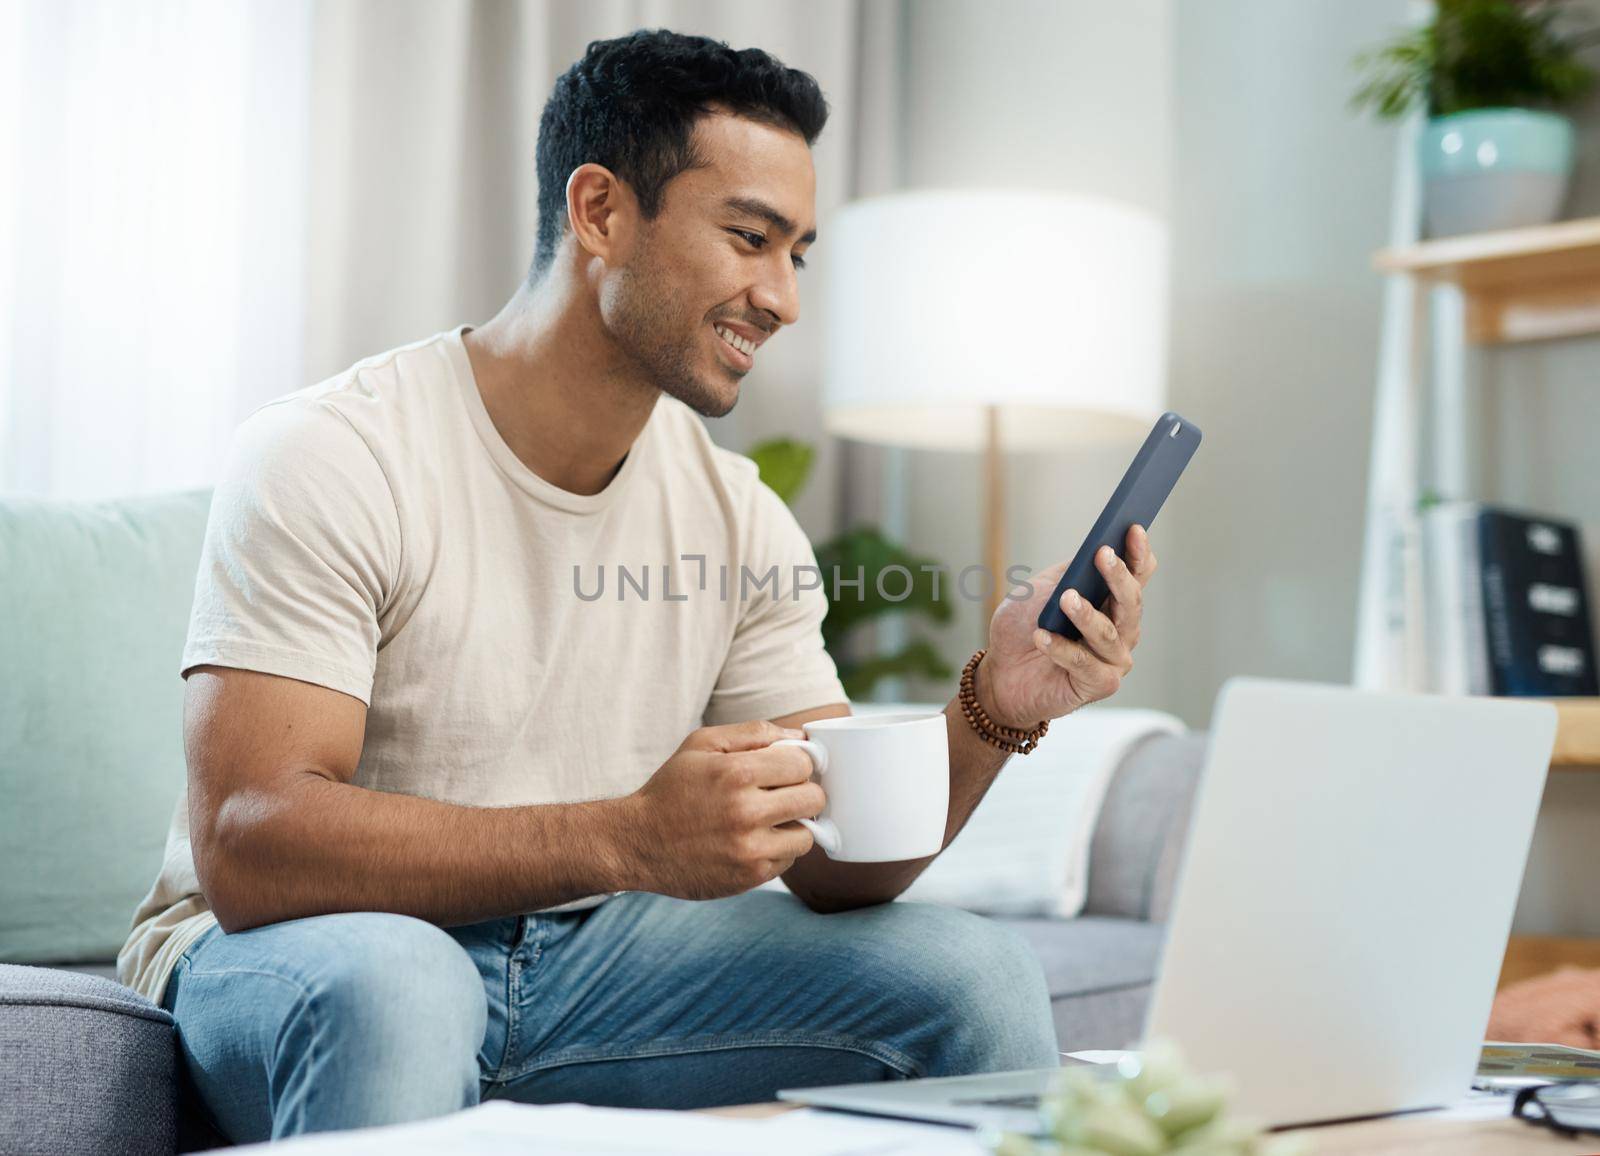 Coffee and technology go hand-in-hand. a young man sitting in his living room and using technology while enjoying a cup of coffee. by YuriArcurs